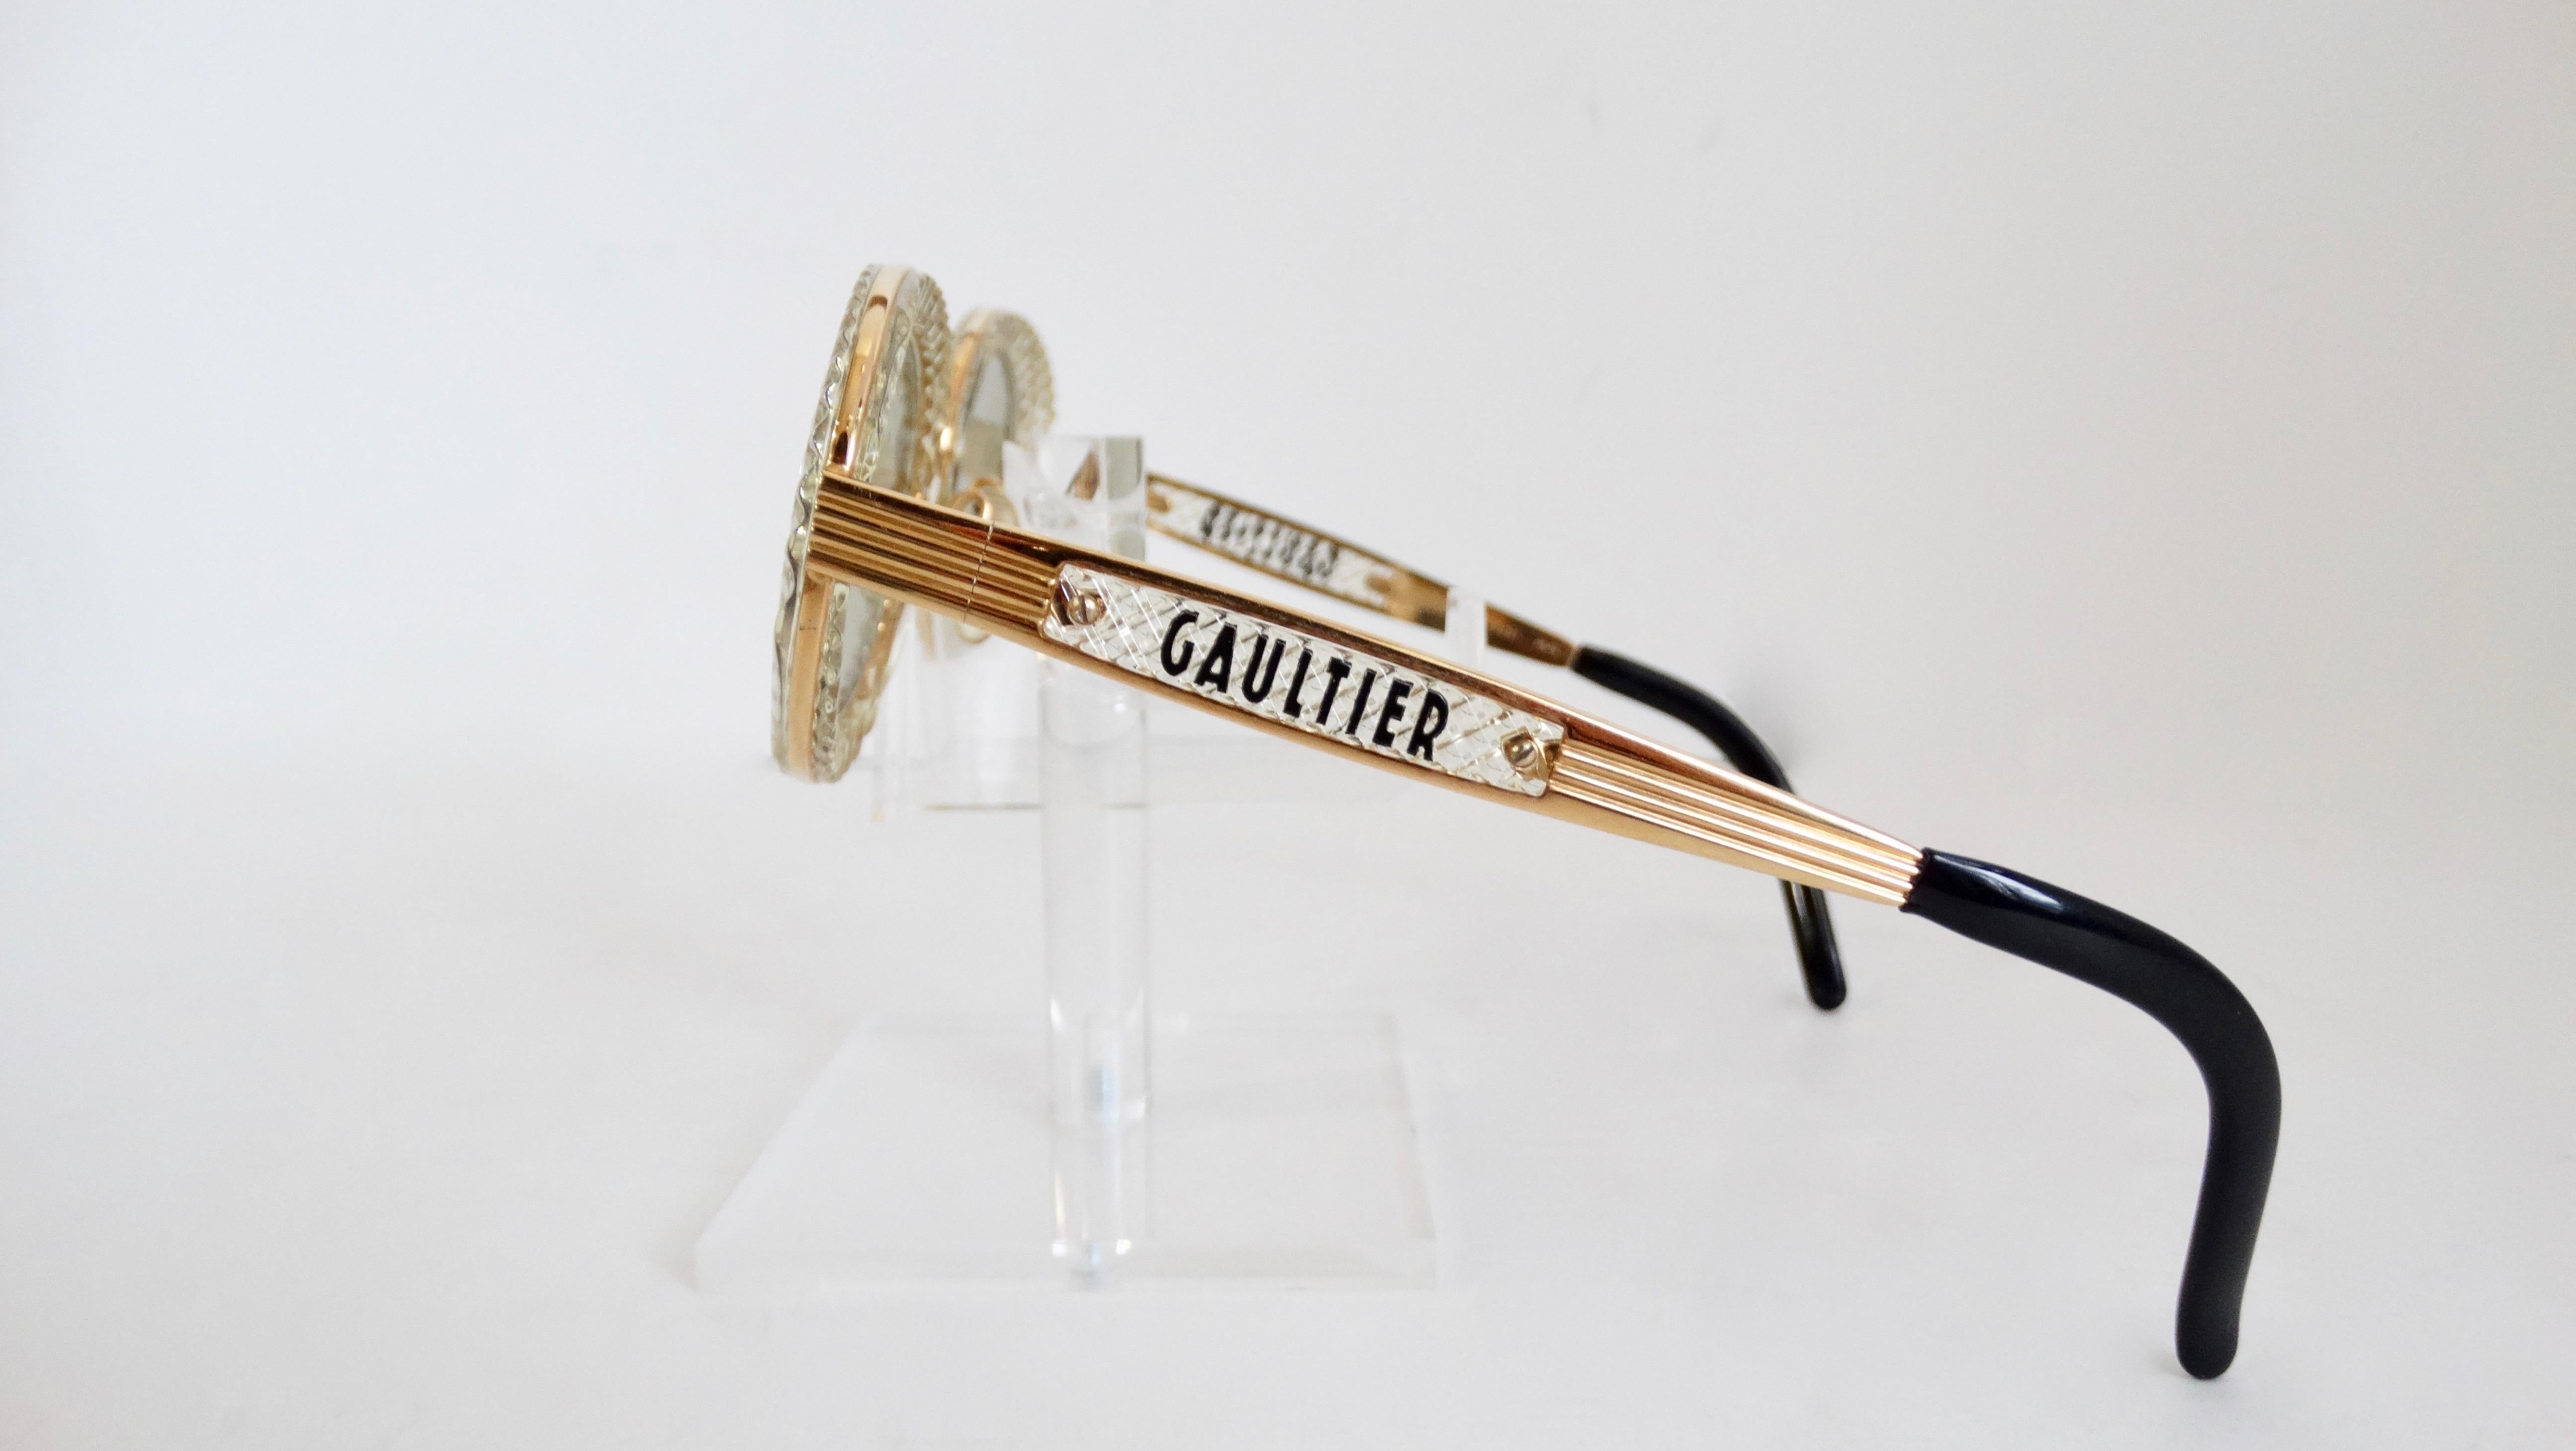 Elevate your look with these very rare John Paul Gaultier sunglasses! Circa 1990s, these sunglasses feature a translucent gold textured oval frame with light green lenses. Includes gold plated hardware with 'Gaultier' on the sides. The ultimate pair